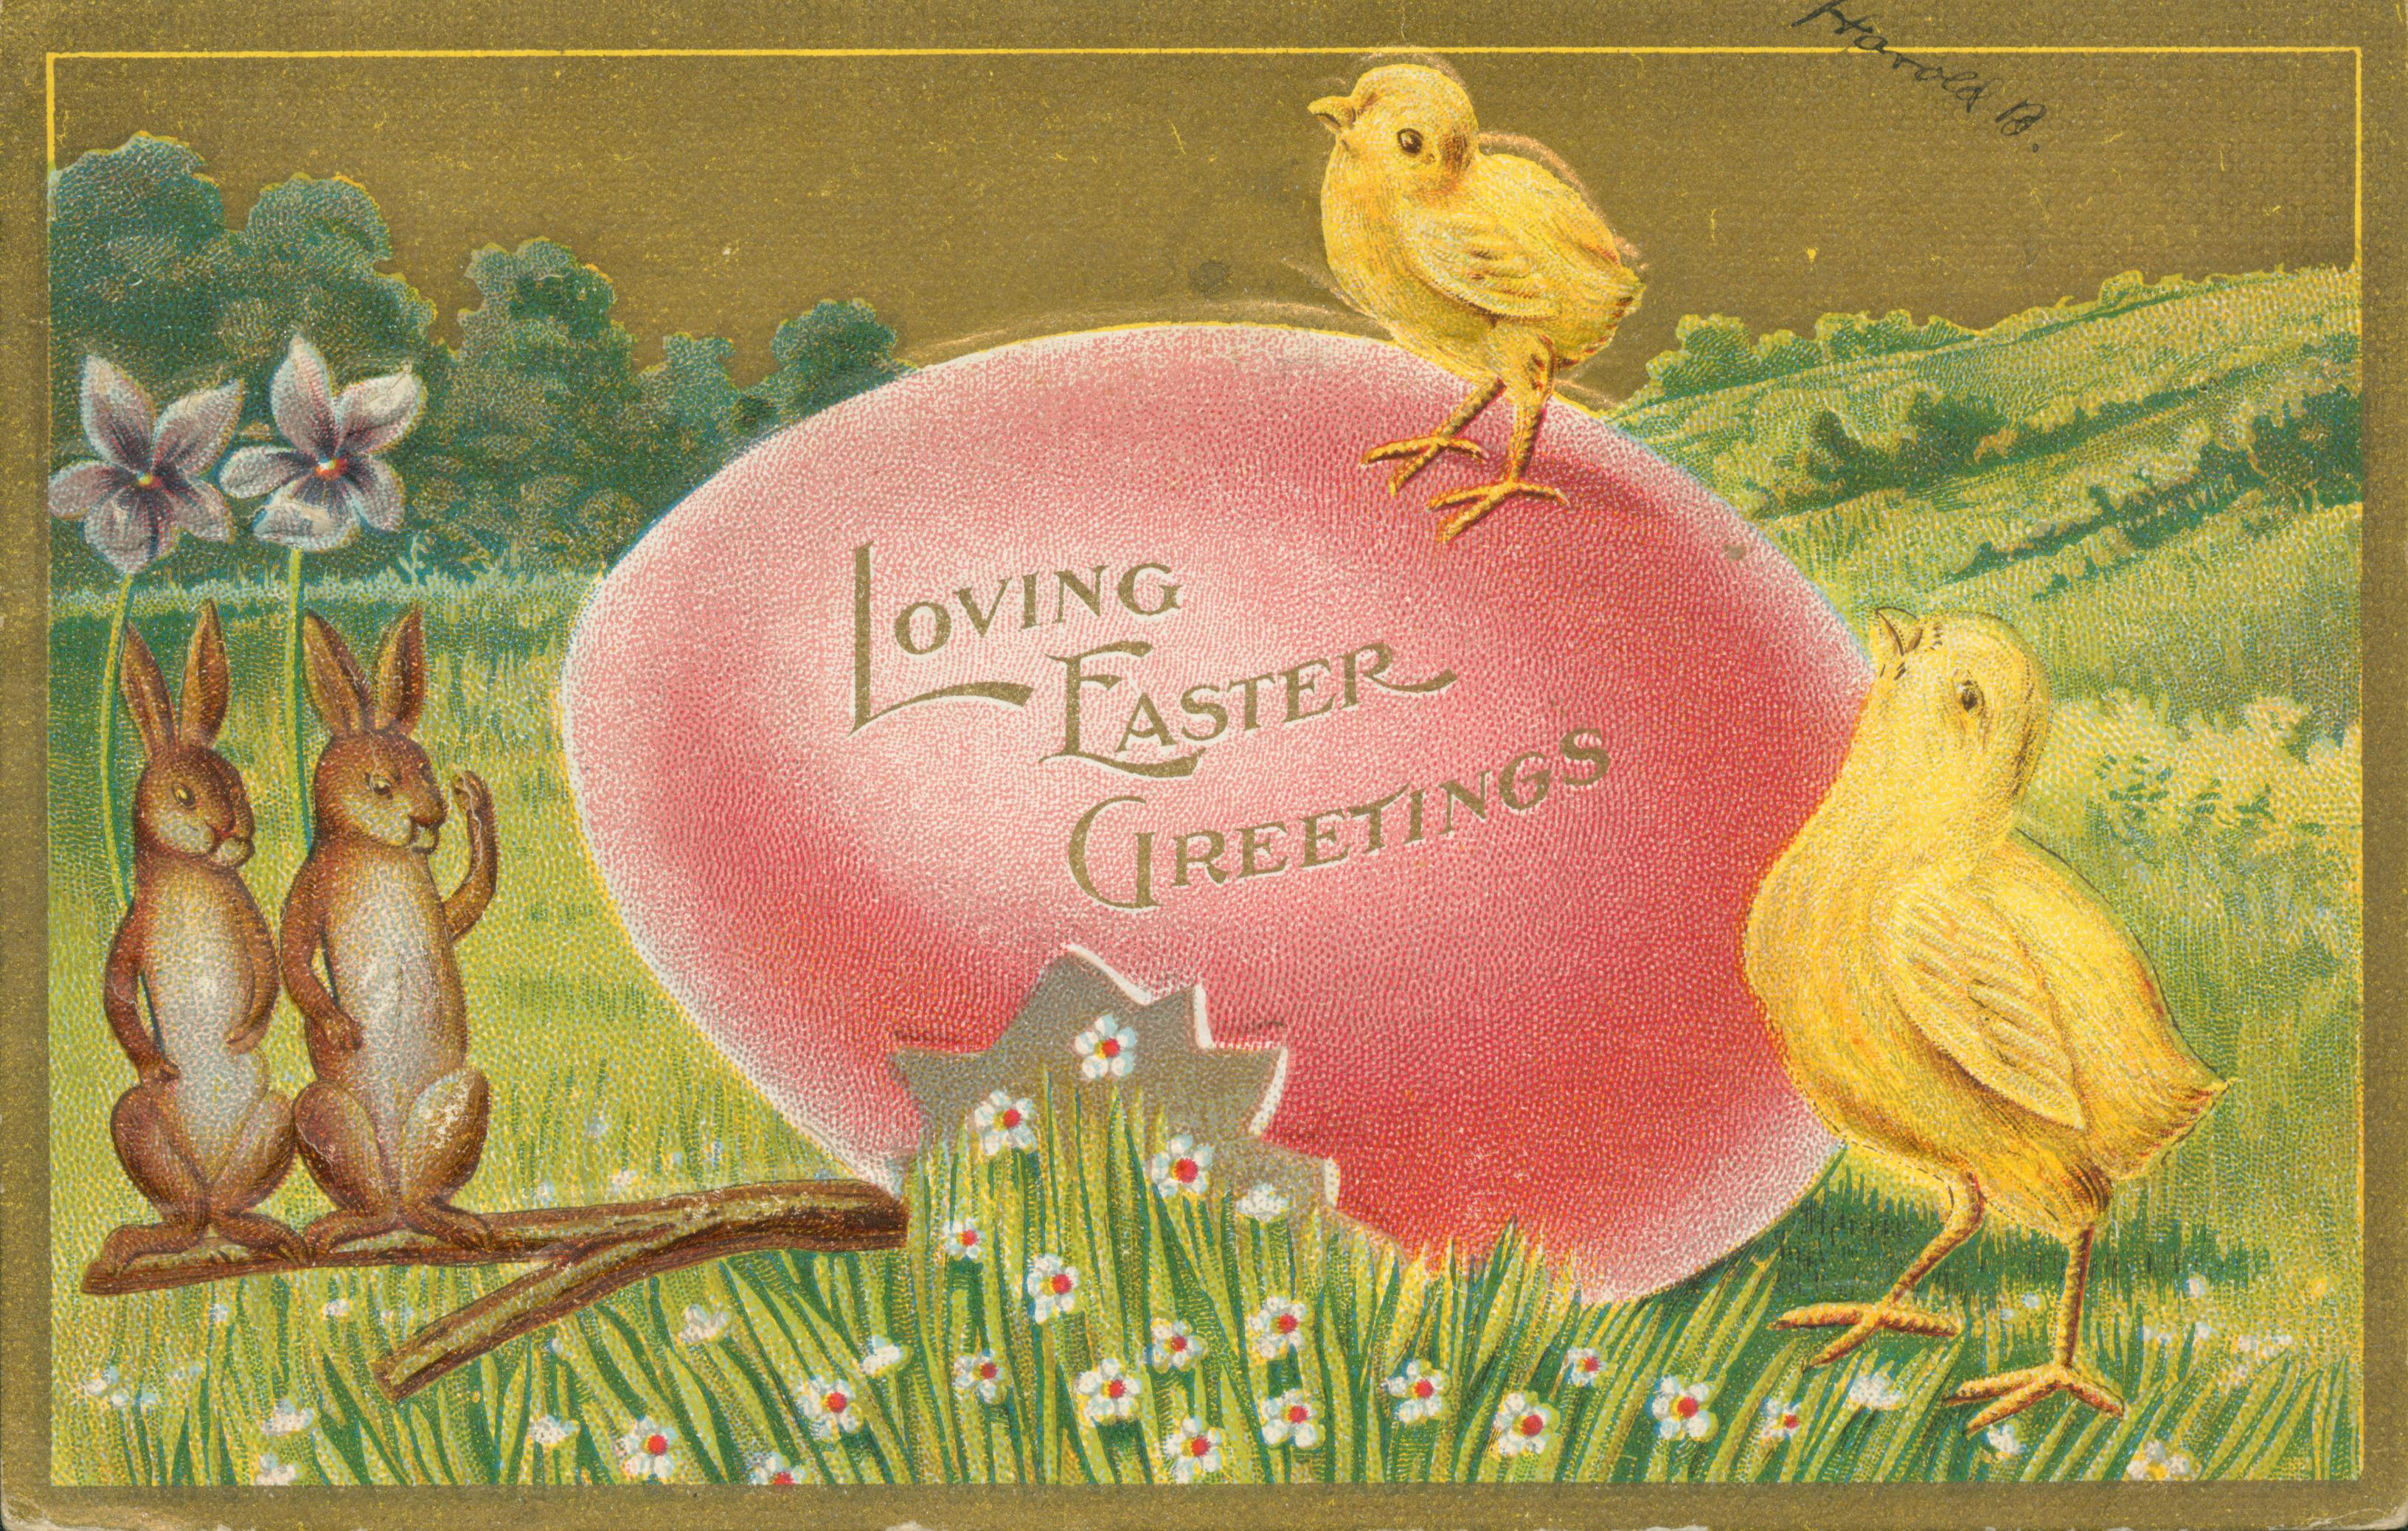 Two chicks and two rabbits around a large red egg .